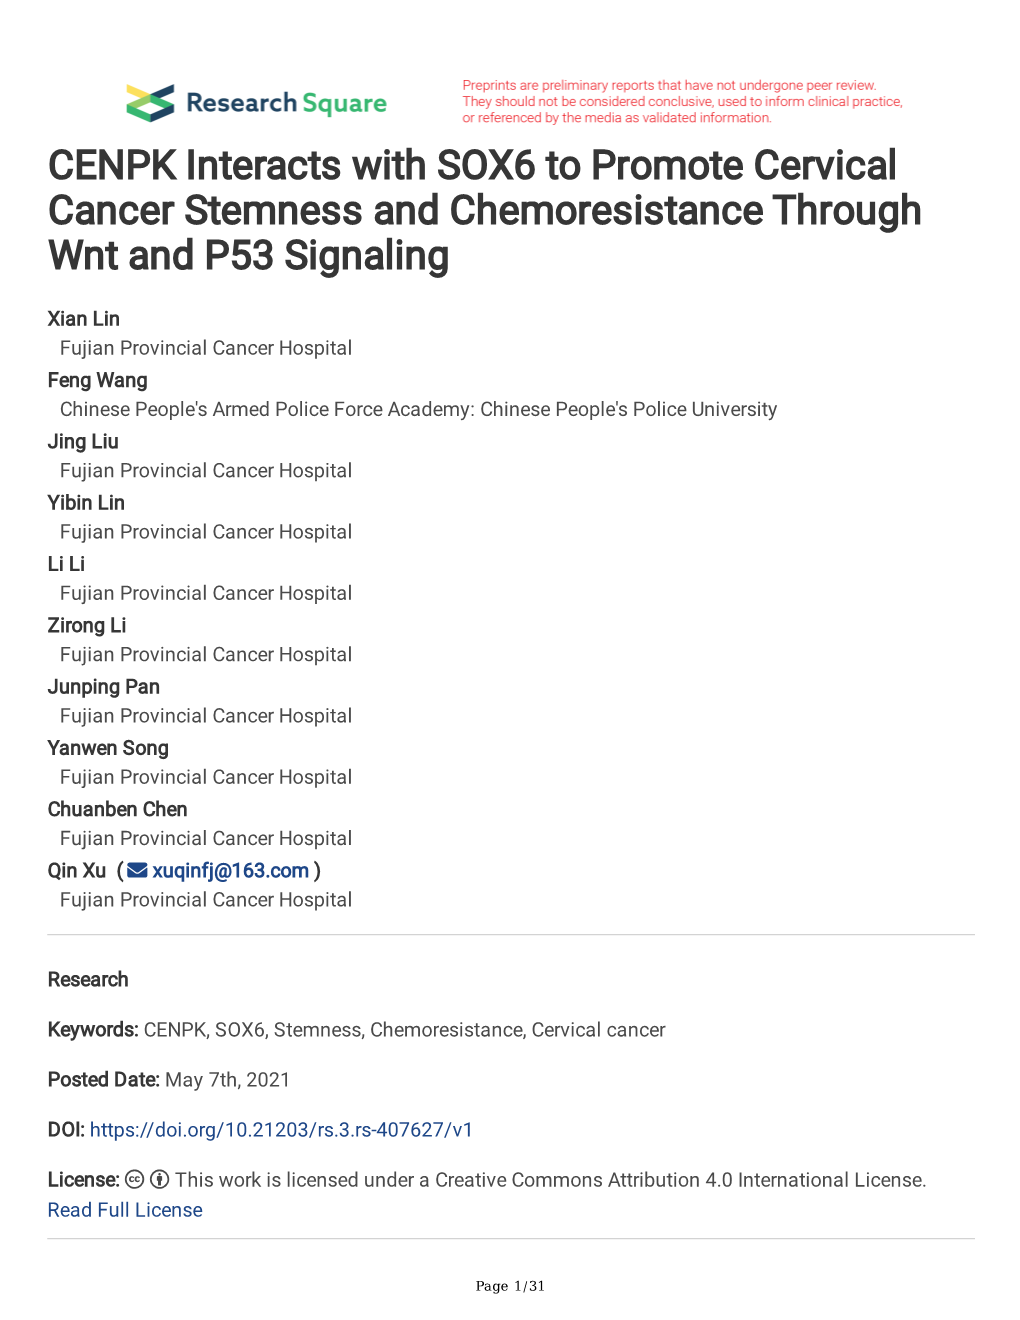 CENPK Interacts with SOX6 to Promote Cervical Cancer Stemness and Chemoresistance Through Wnt and P53 Signaling